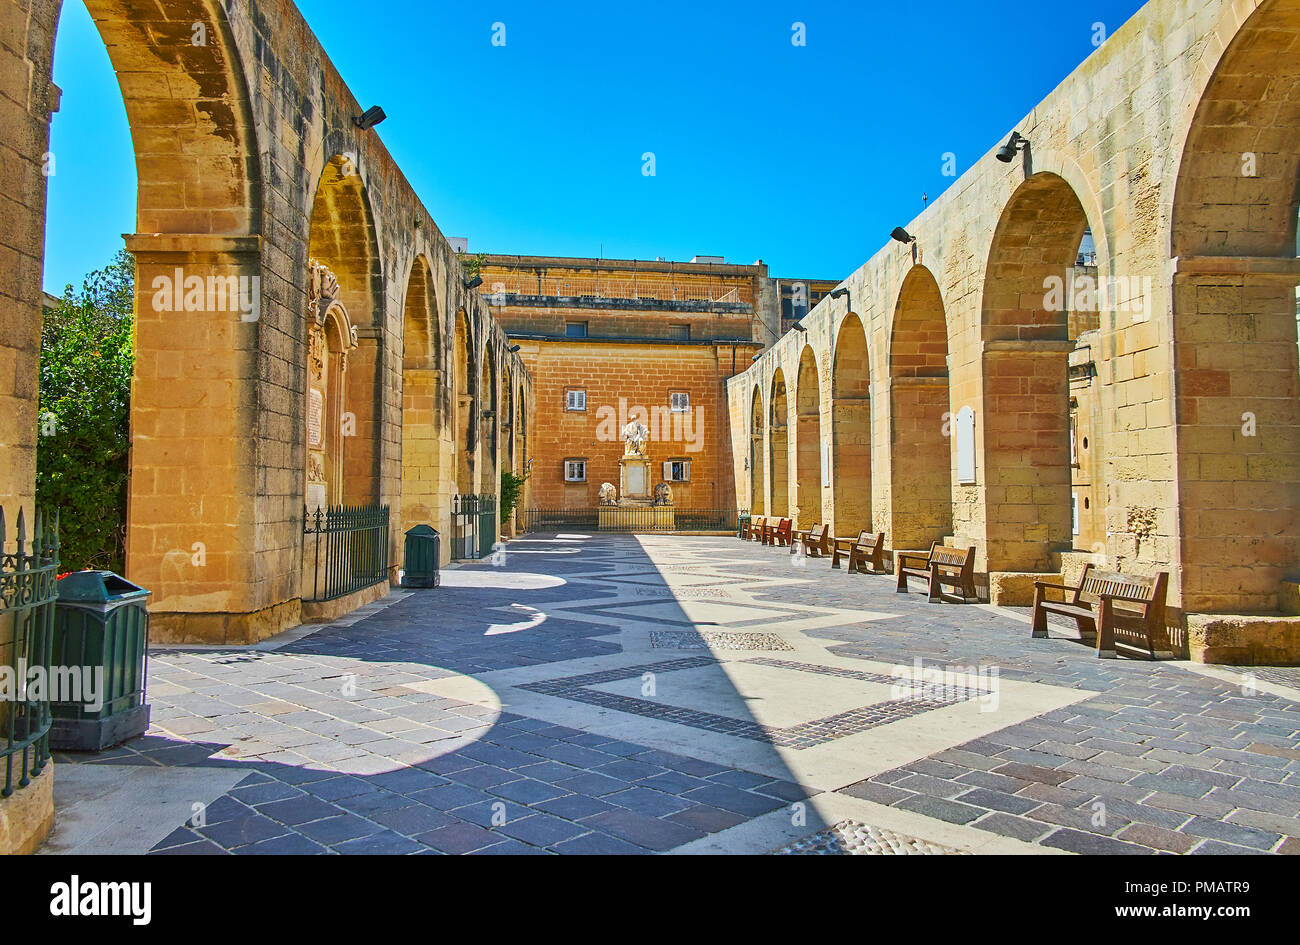 The picturesque terrace with arched walls and memorial statue in Upper Barrakka Gardens, Valletta, Malta. Stock Photo